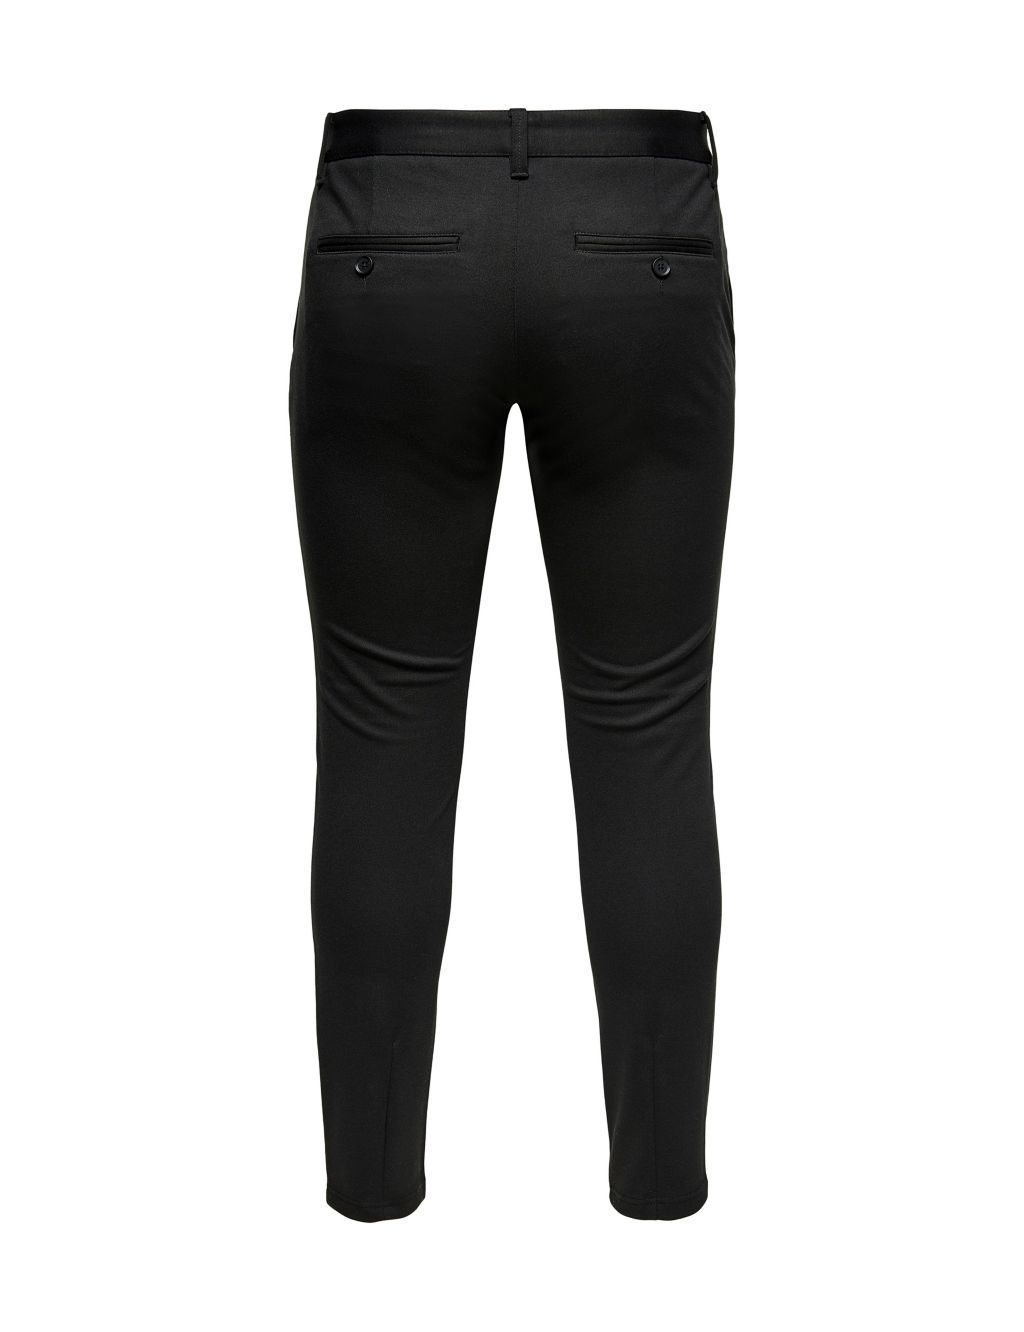 Tapered Fit Flat Front Trousers image 6